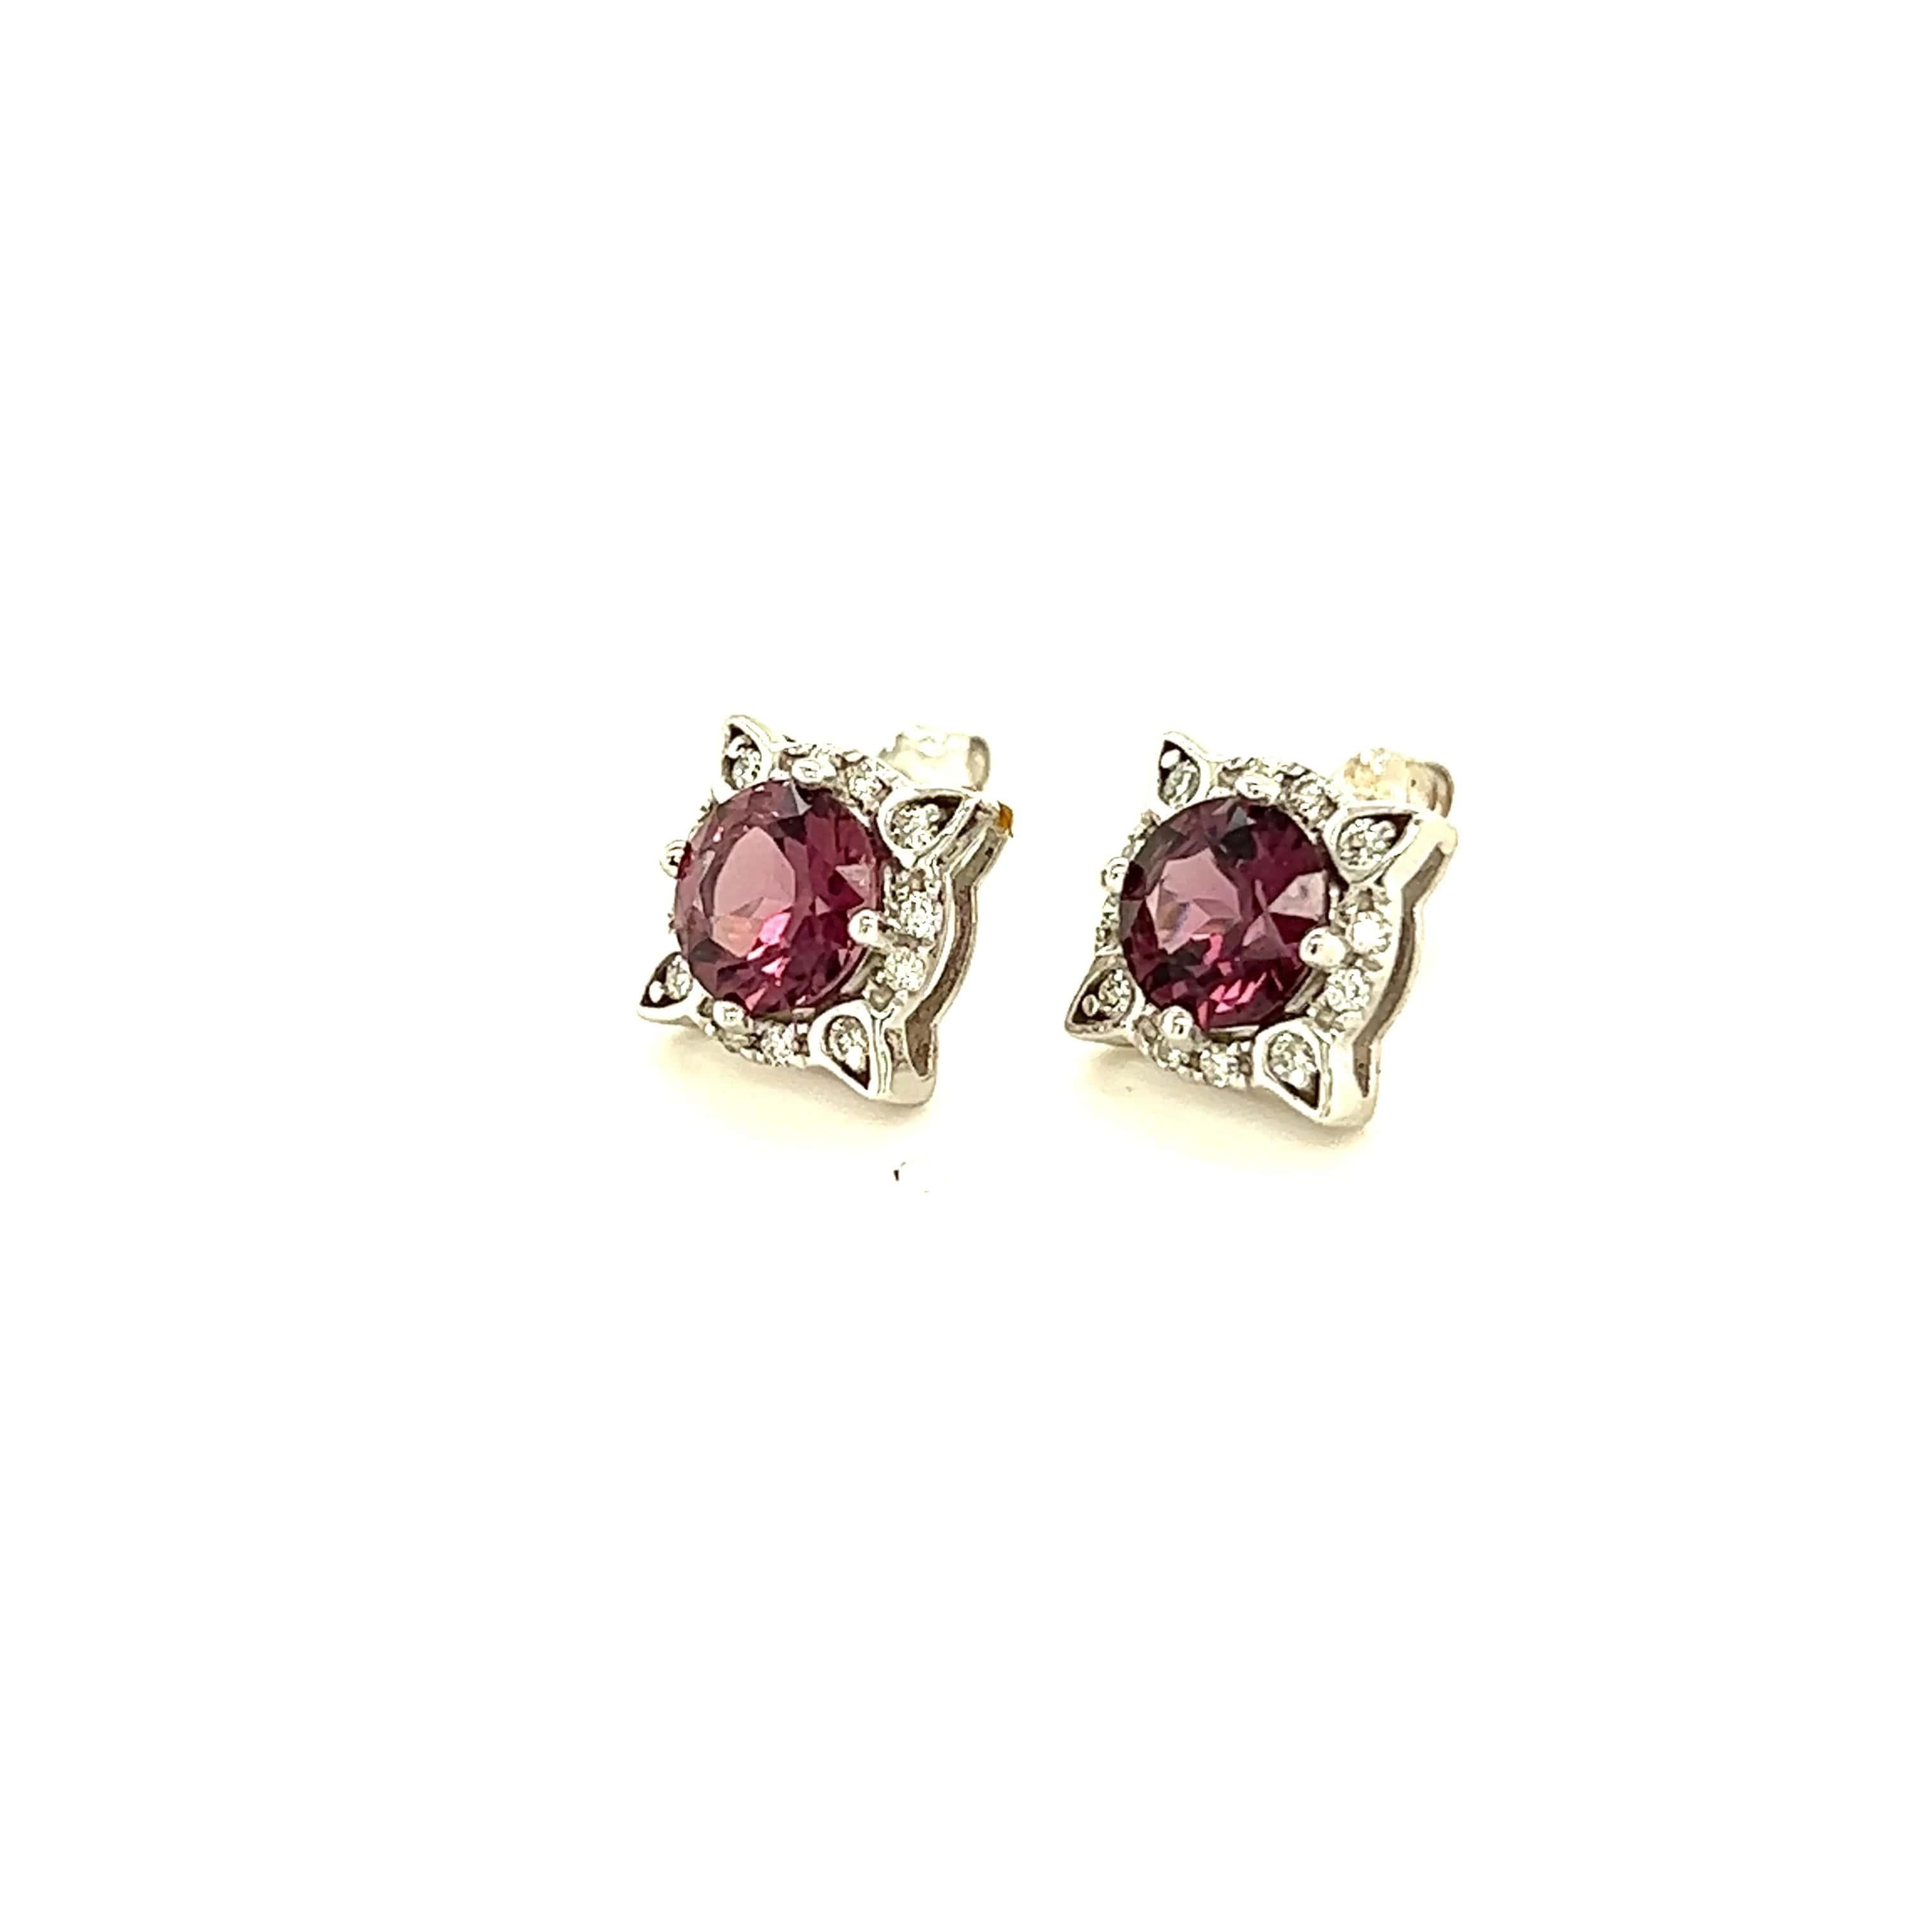 Brilliant Cut Natural Spinel Diamond Earrings 14k Y Gold 2.04 TCW Certified  For Sale